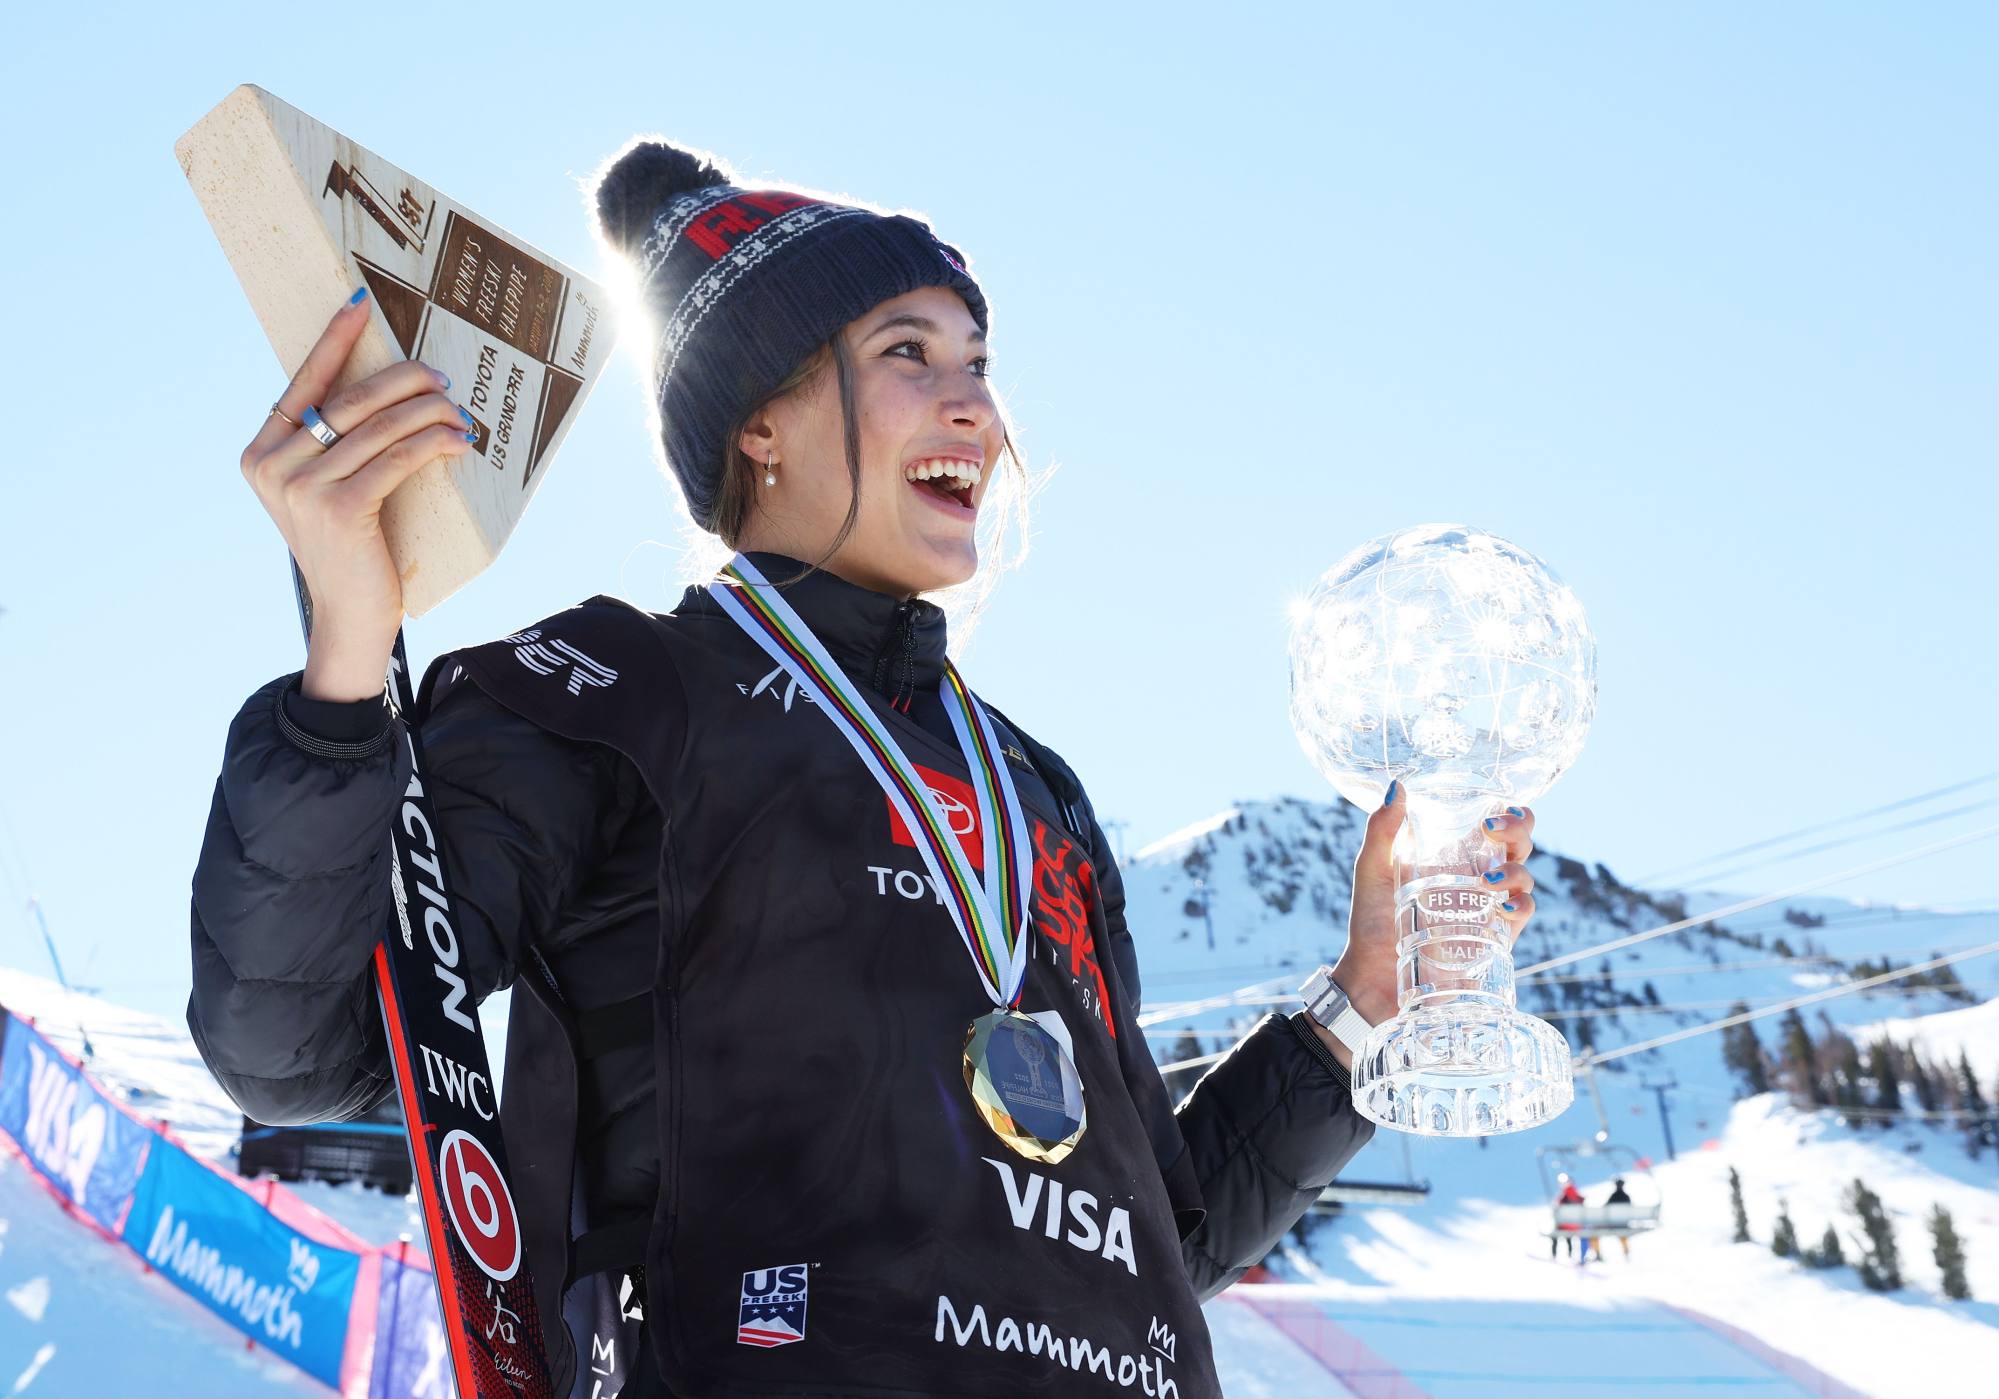 Eileen Gu, the part-time teen model and world champion skier